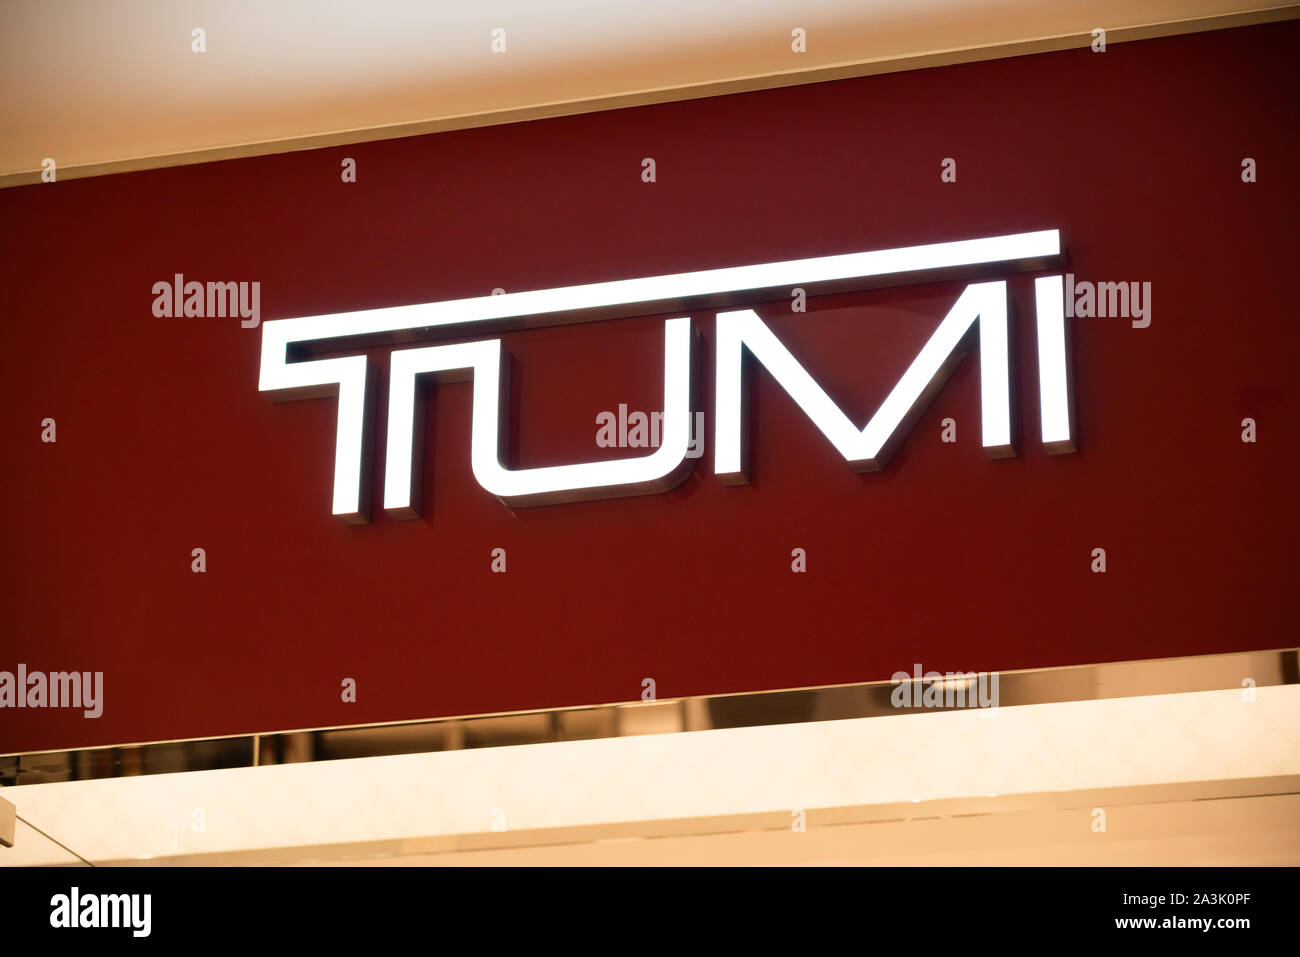 American high-end suitcases and travel bags manufacturer Tumi logo seen ...